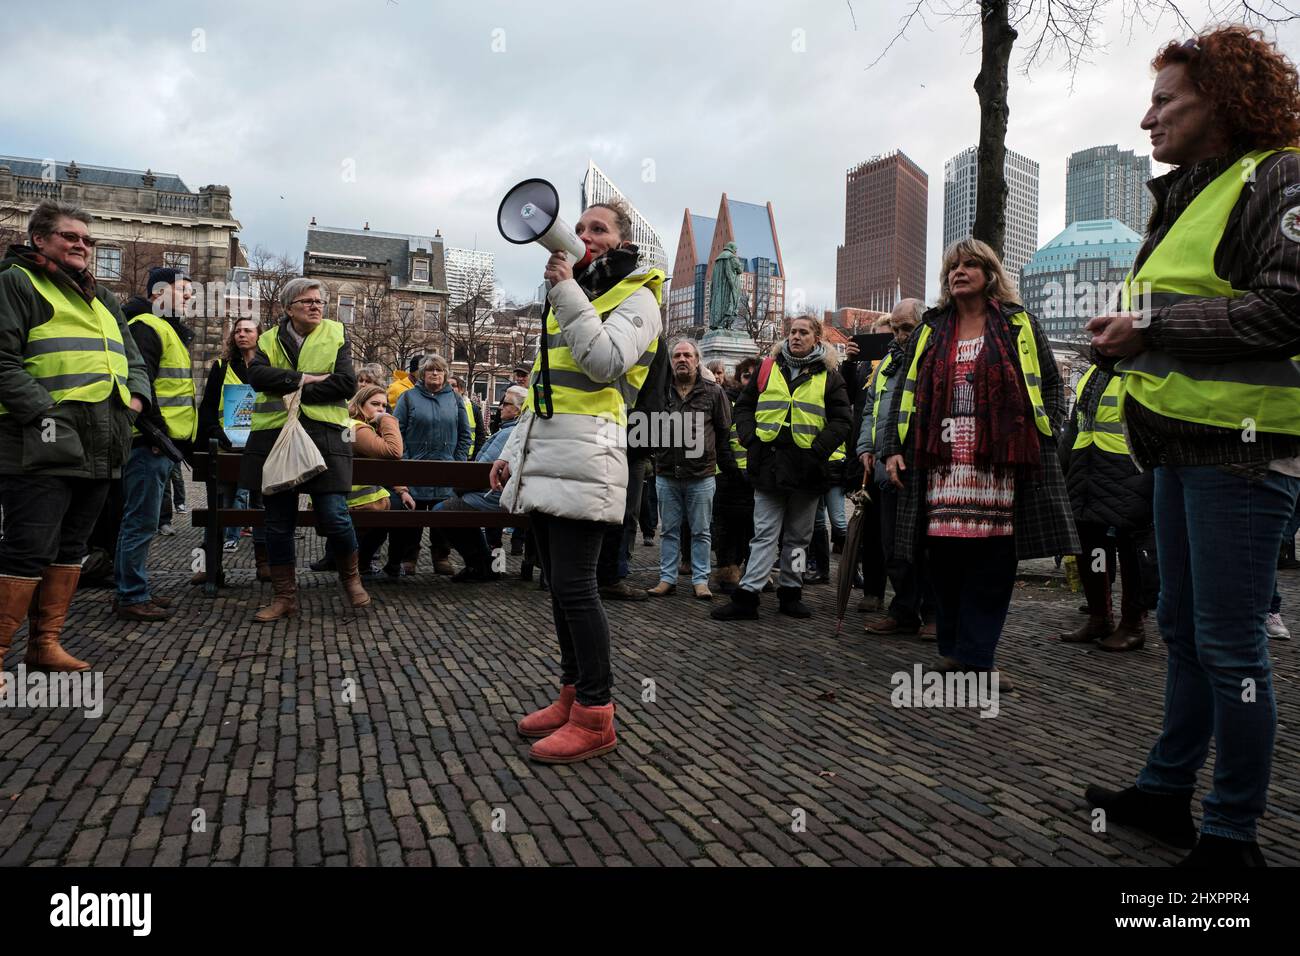 Members of the Yellow Vests movement protest in front of the parliament in The Hague. Stock Photo